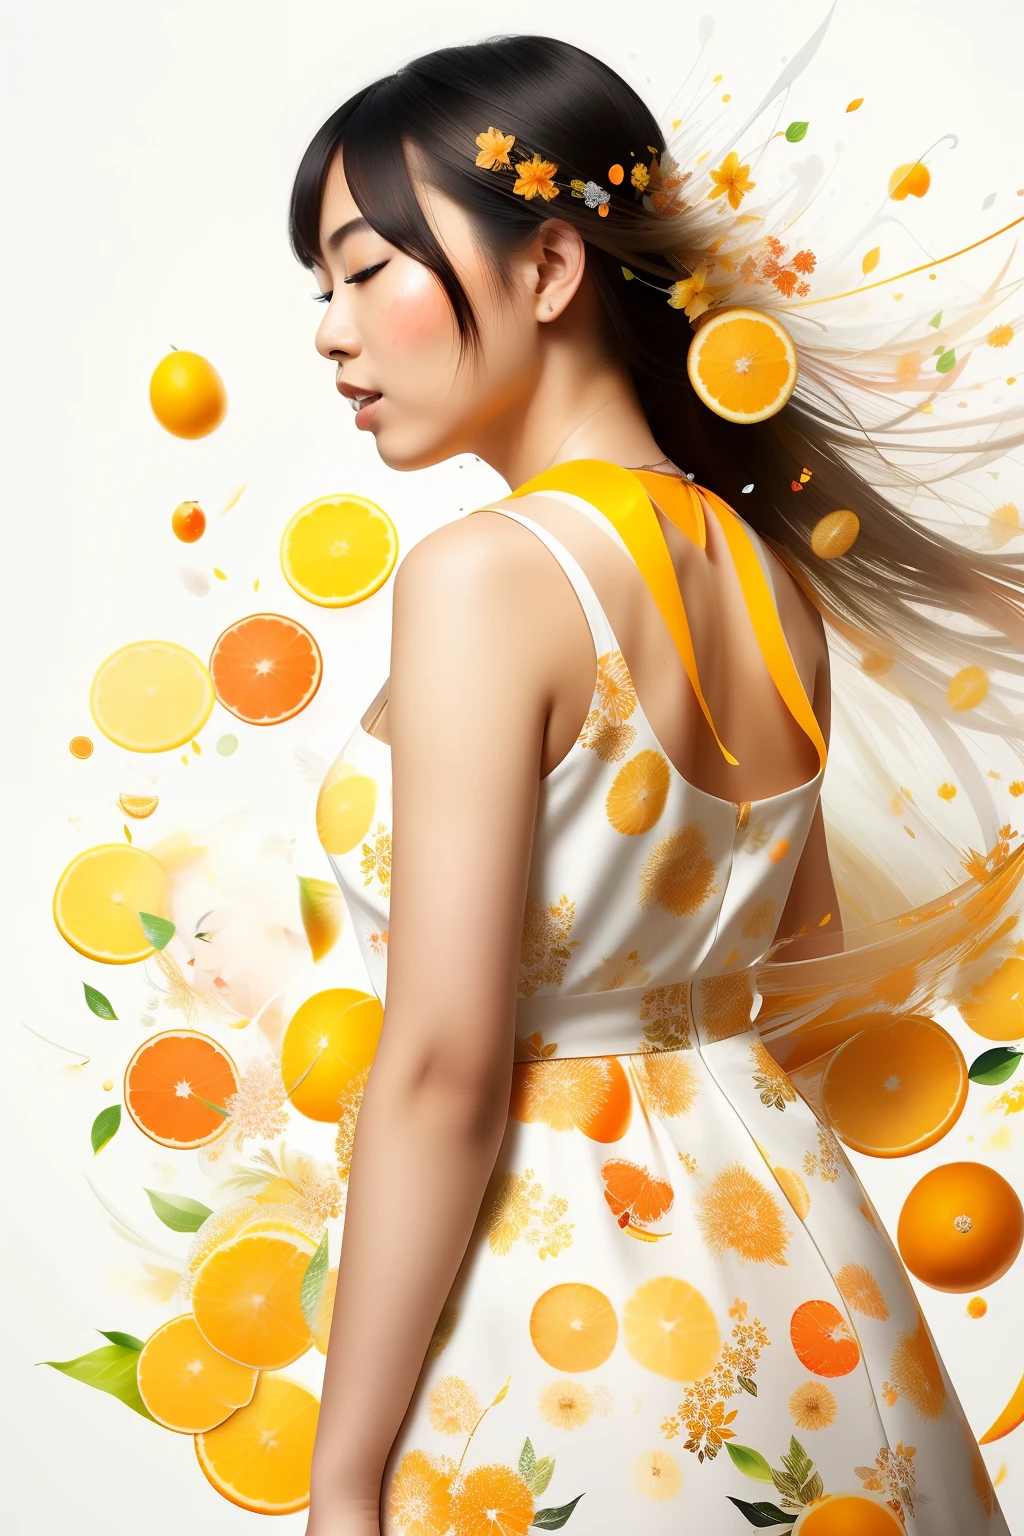 Beautiful Asian woman wearing a floral white dress, citrus fruits flying around, Rainbow Orange Highlights, background of assorted citrus fruits, Splashes of orange juice, Side view, textured, photo-realistic, 12k quality 